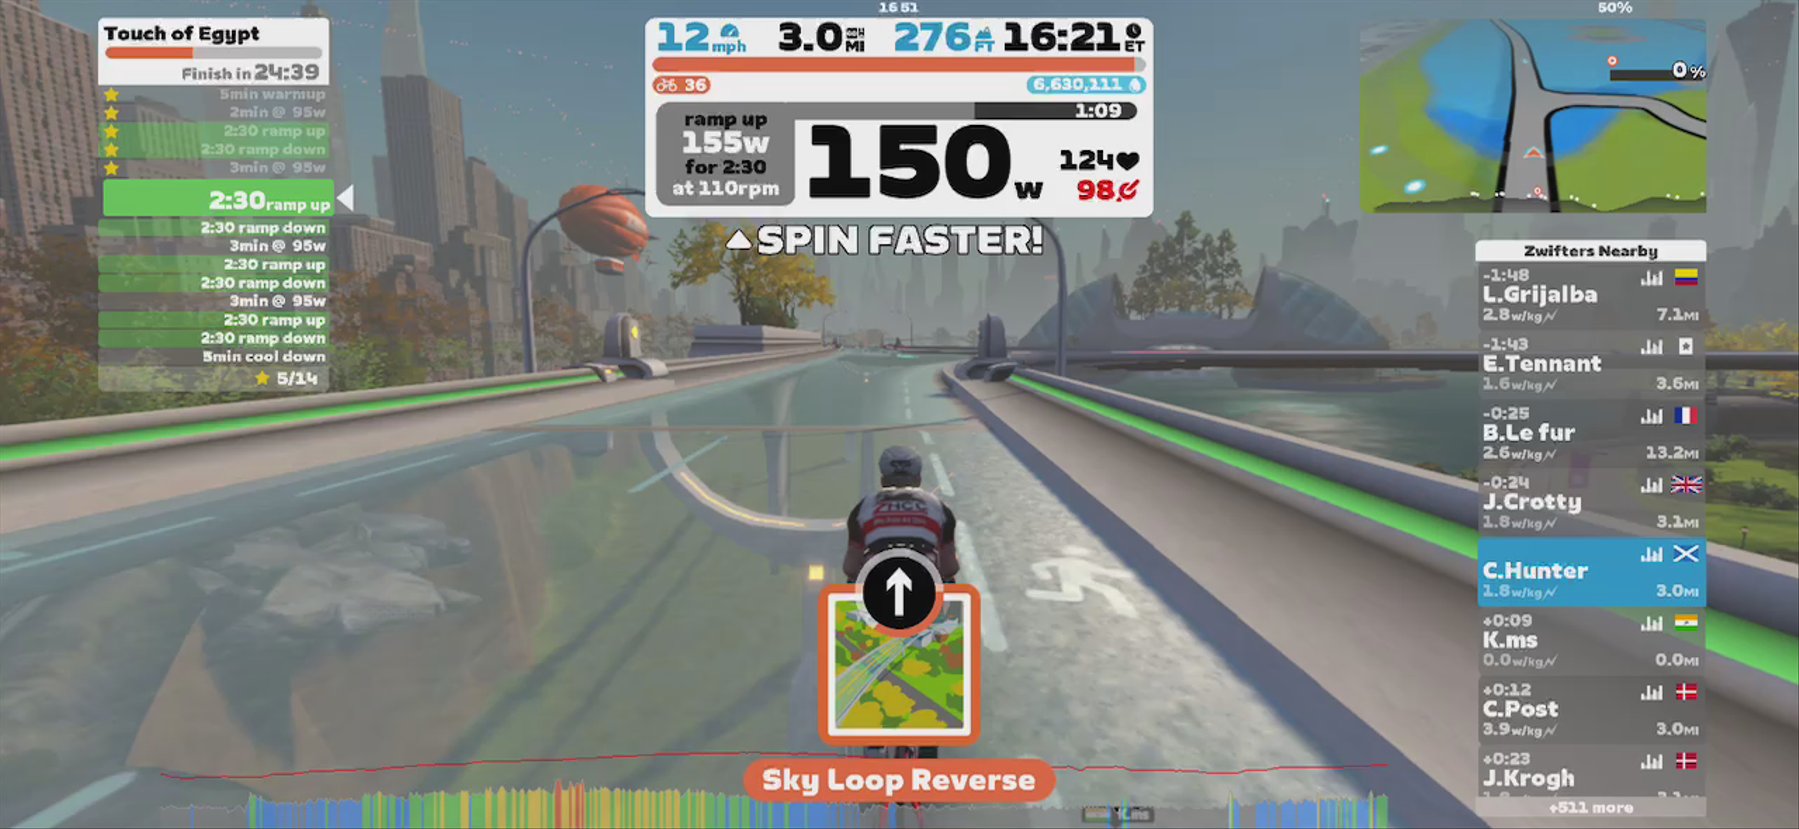 Zwift - Touch of Egypt in New York